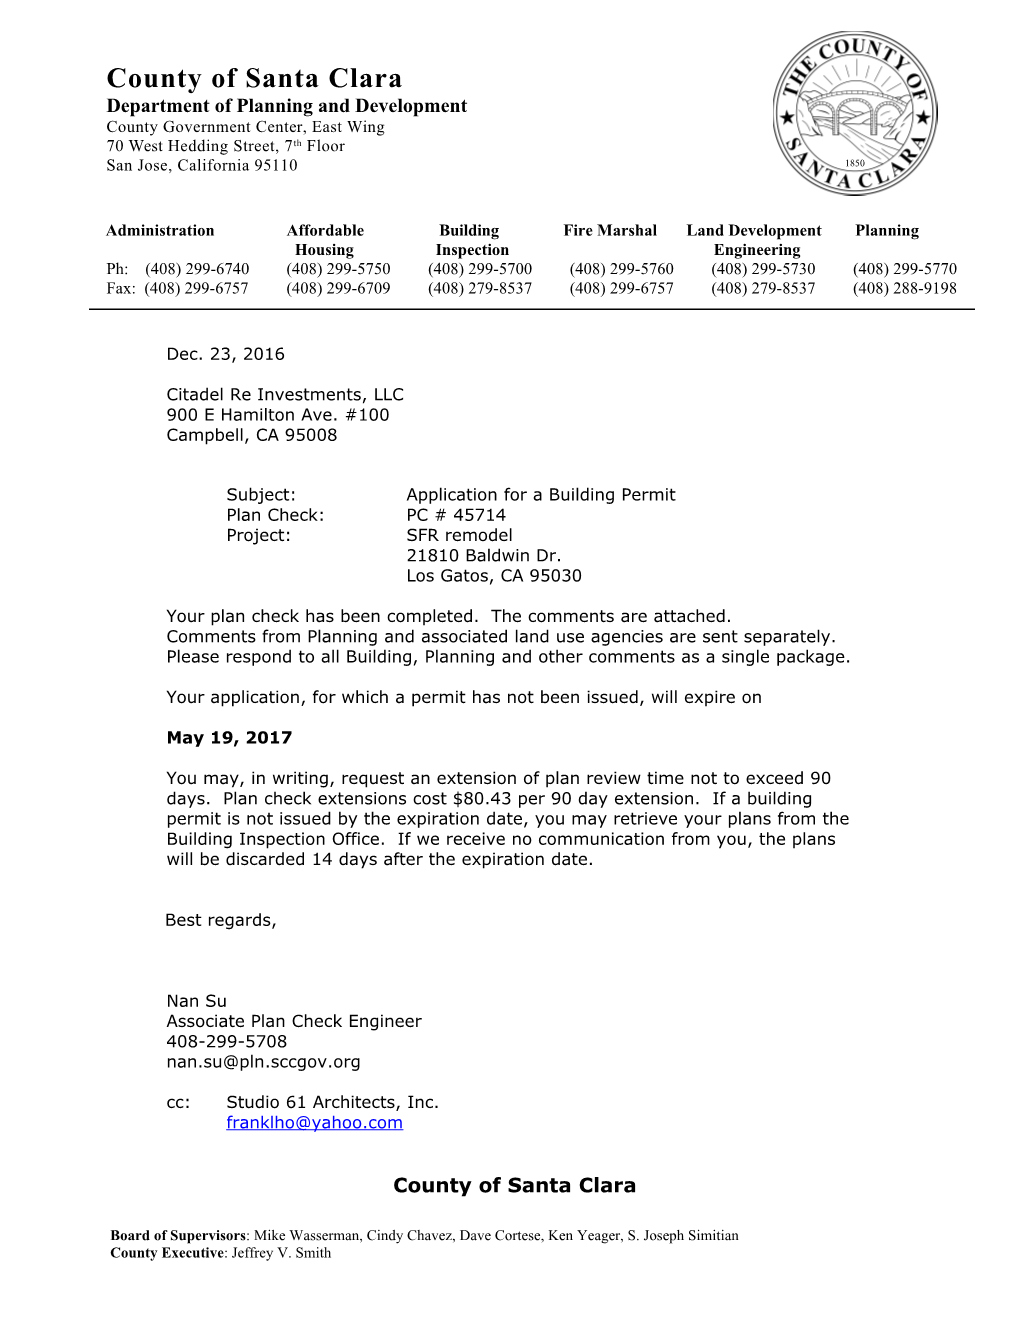 Subject:Application for a Building Permit